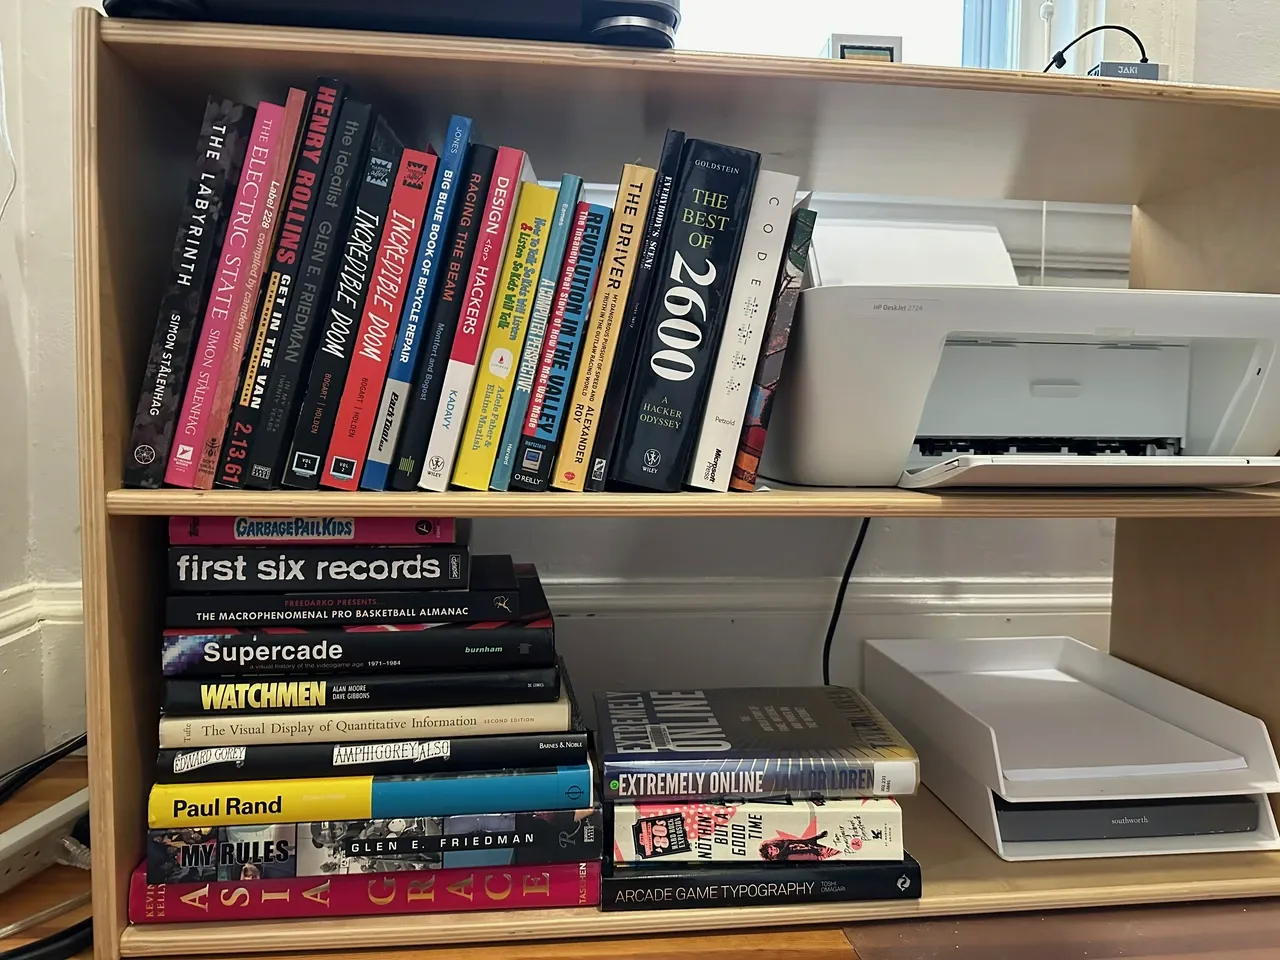 A bookshelf with a varied collection of books ranging from design to basketball almanacs and a white printer on the second shelf, situated next to a window